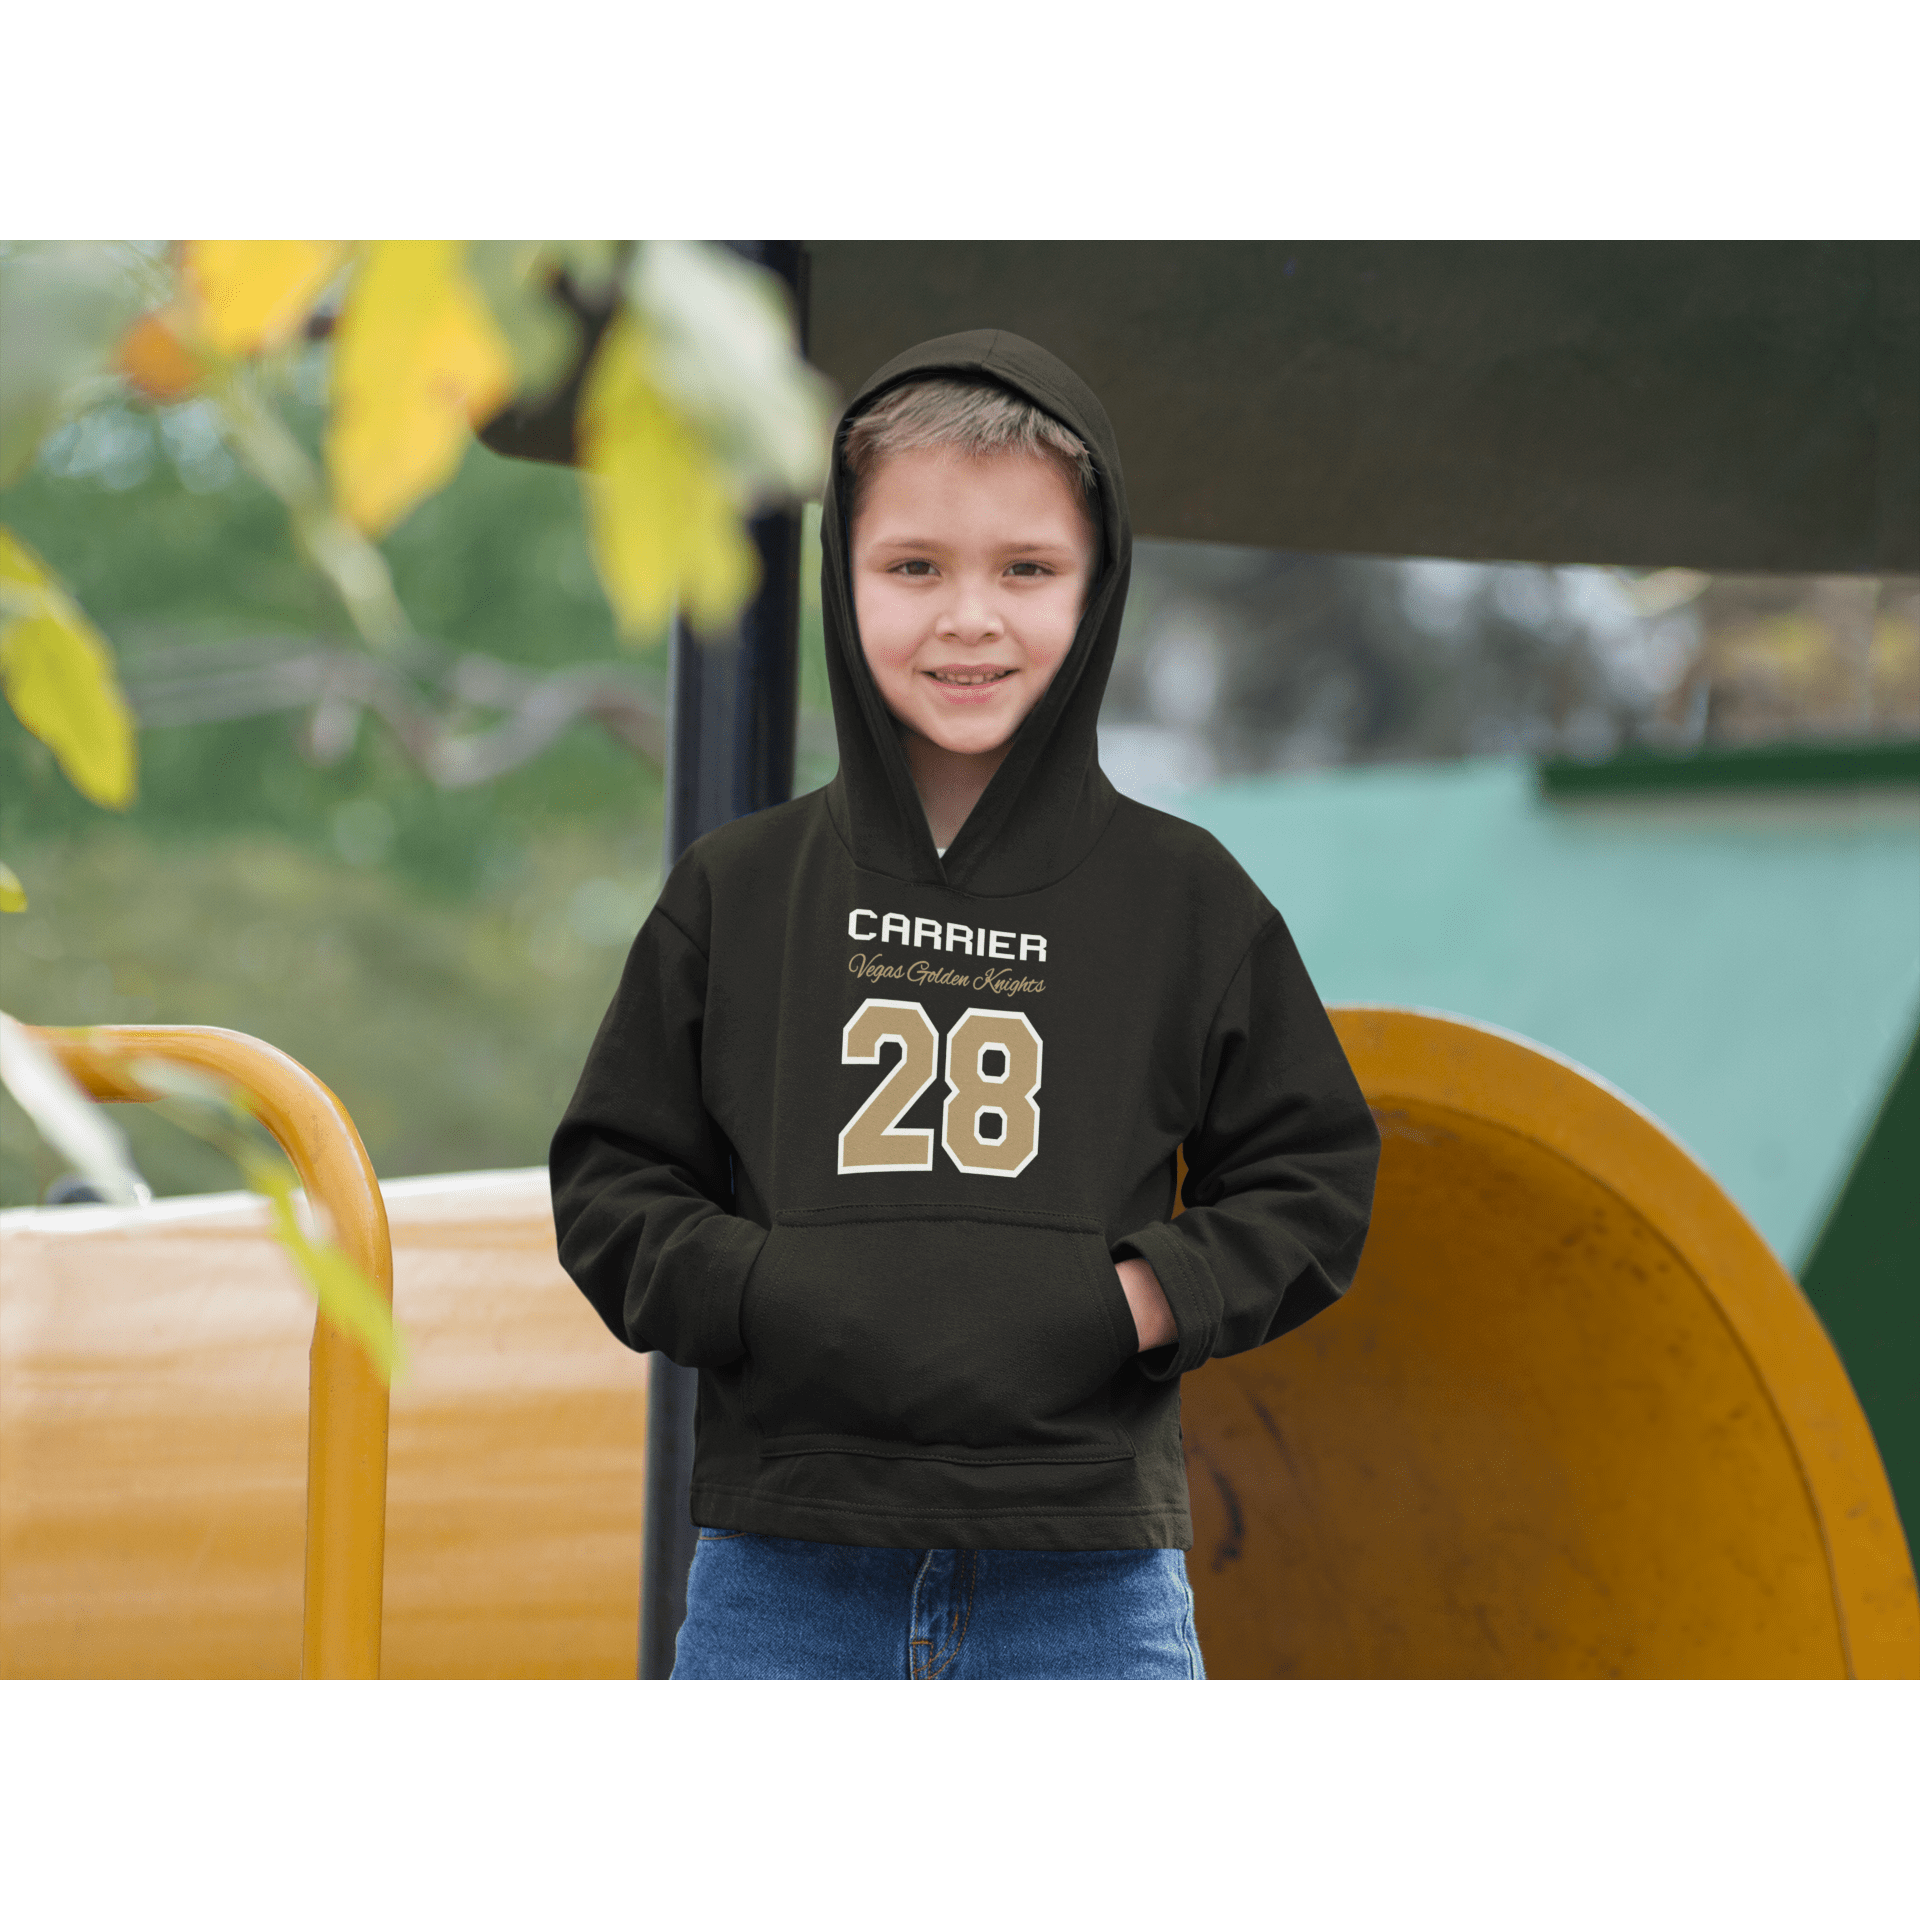 Kids clothes Carrier 28 Vegas Golden Knights Youth Hooded Sweatshirt